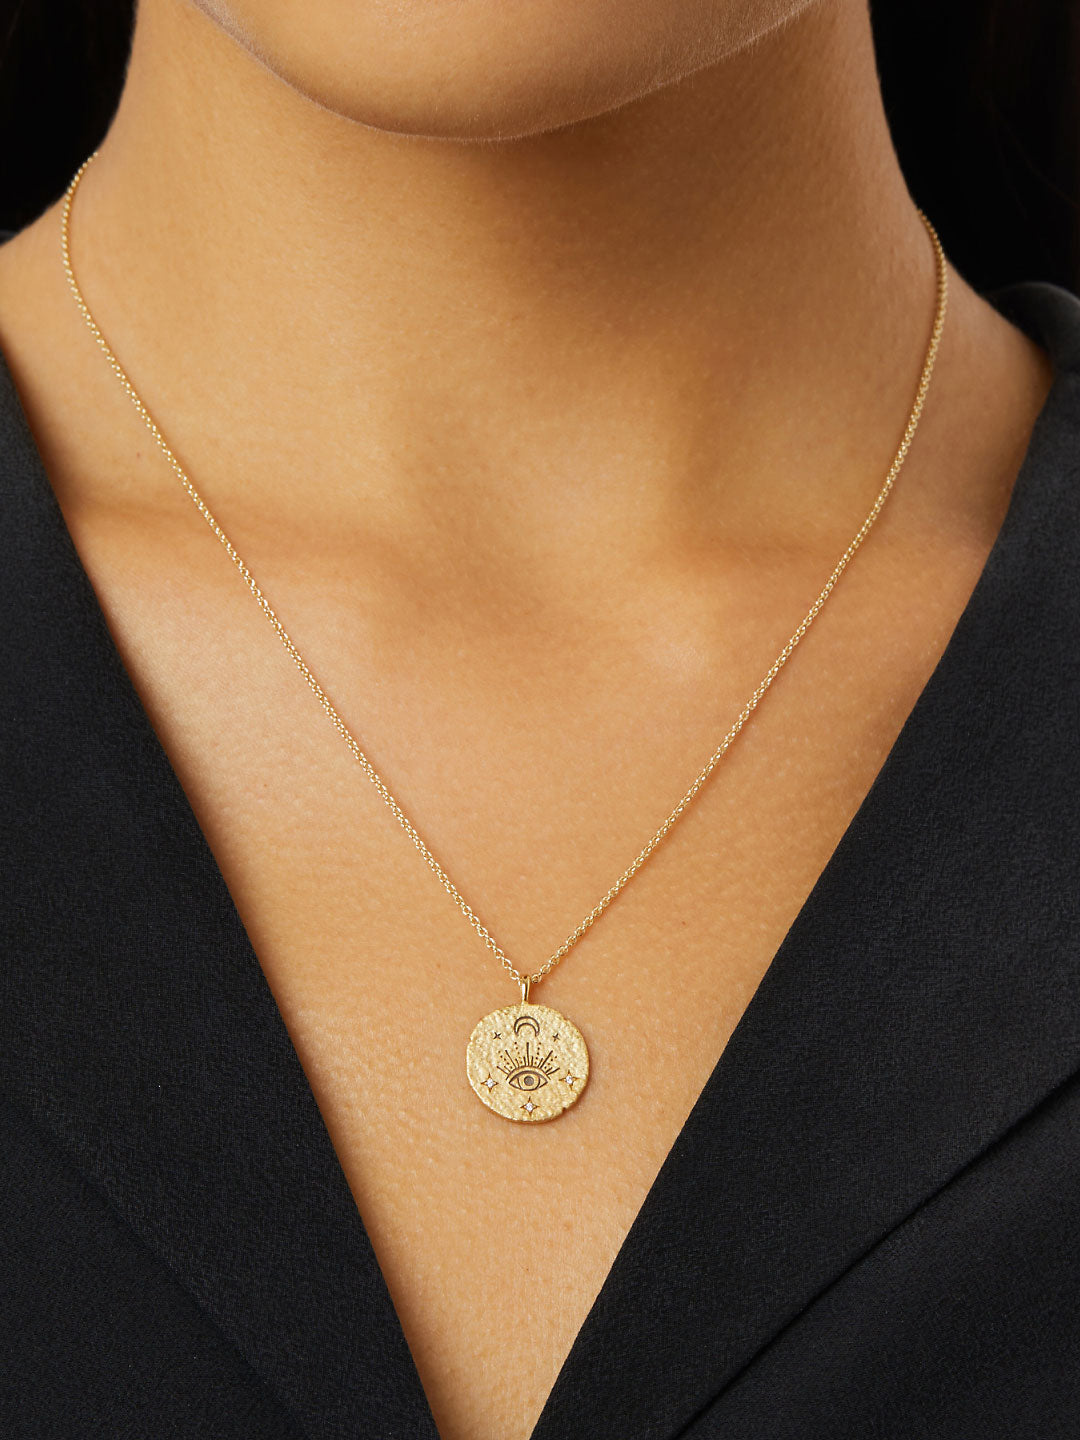 Ana Luisa Jewelry Necklaces Pendants Gold Coin Necklace Spirit Pendant Gold